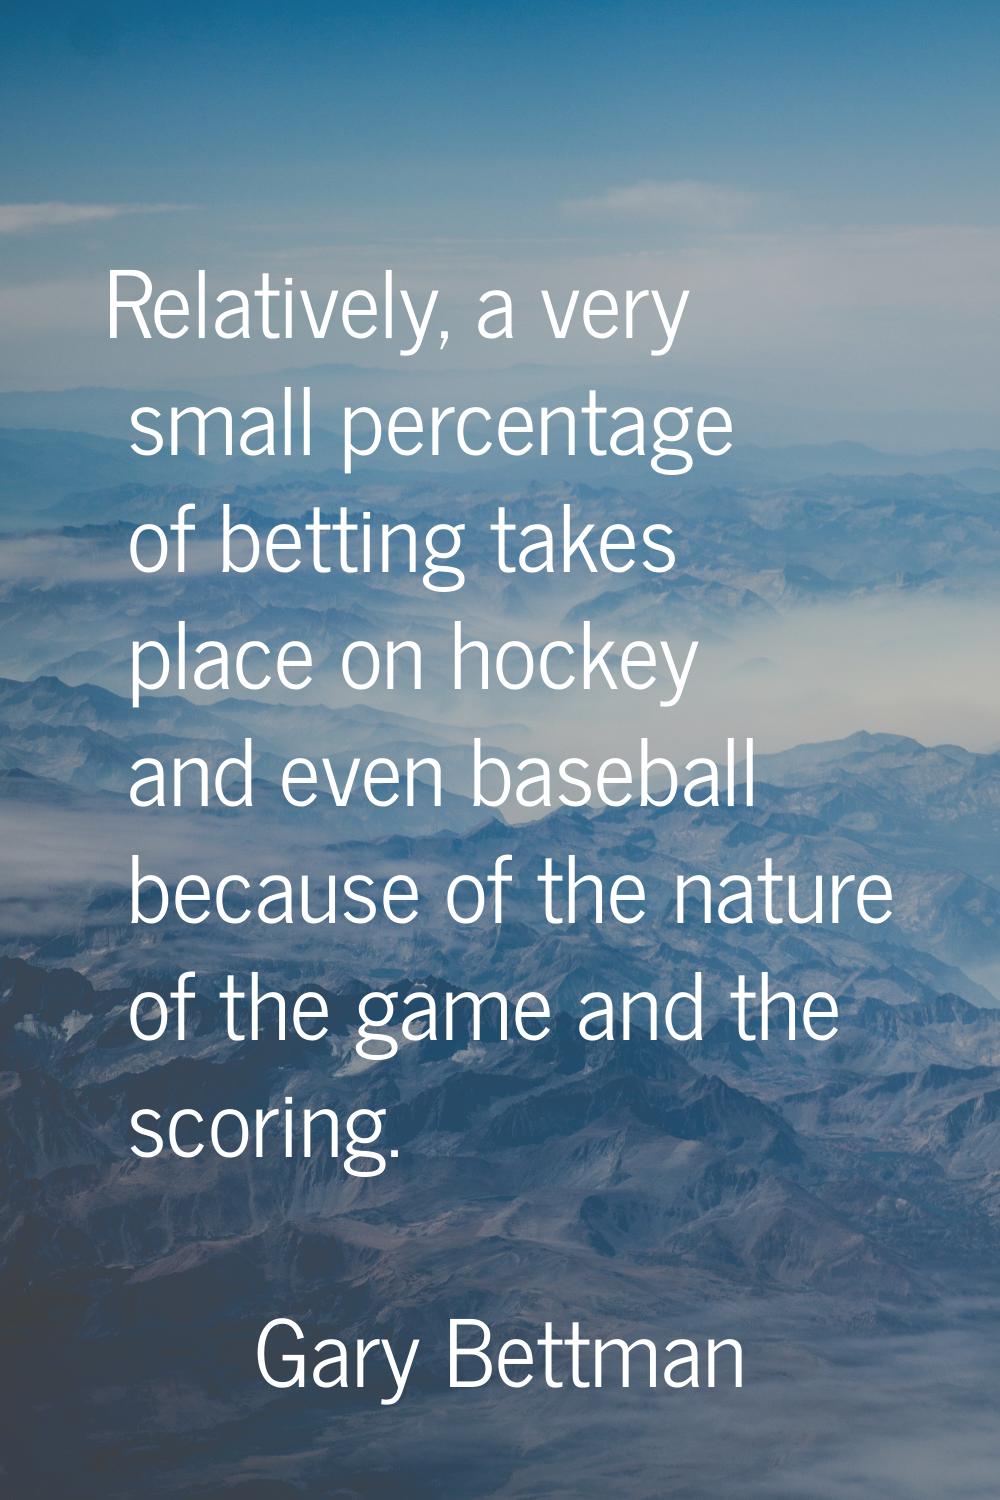 Relatively, a very small percentage of betting takes place on hockey and even baseball because of t